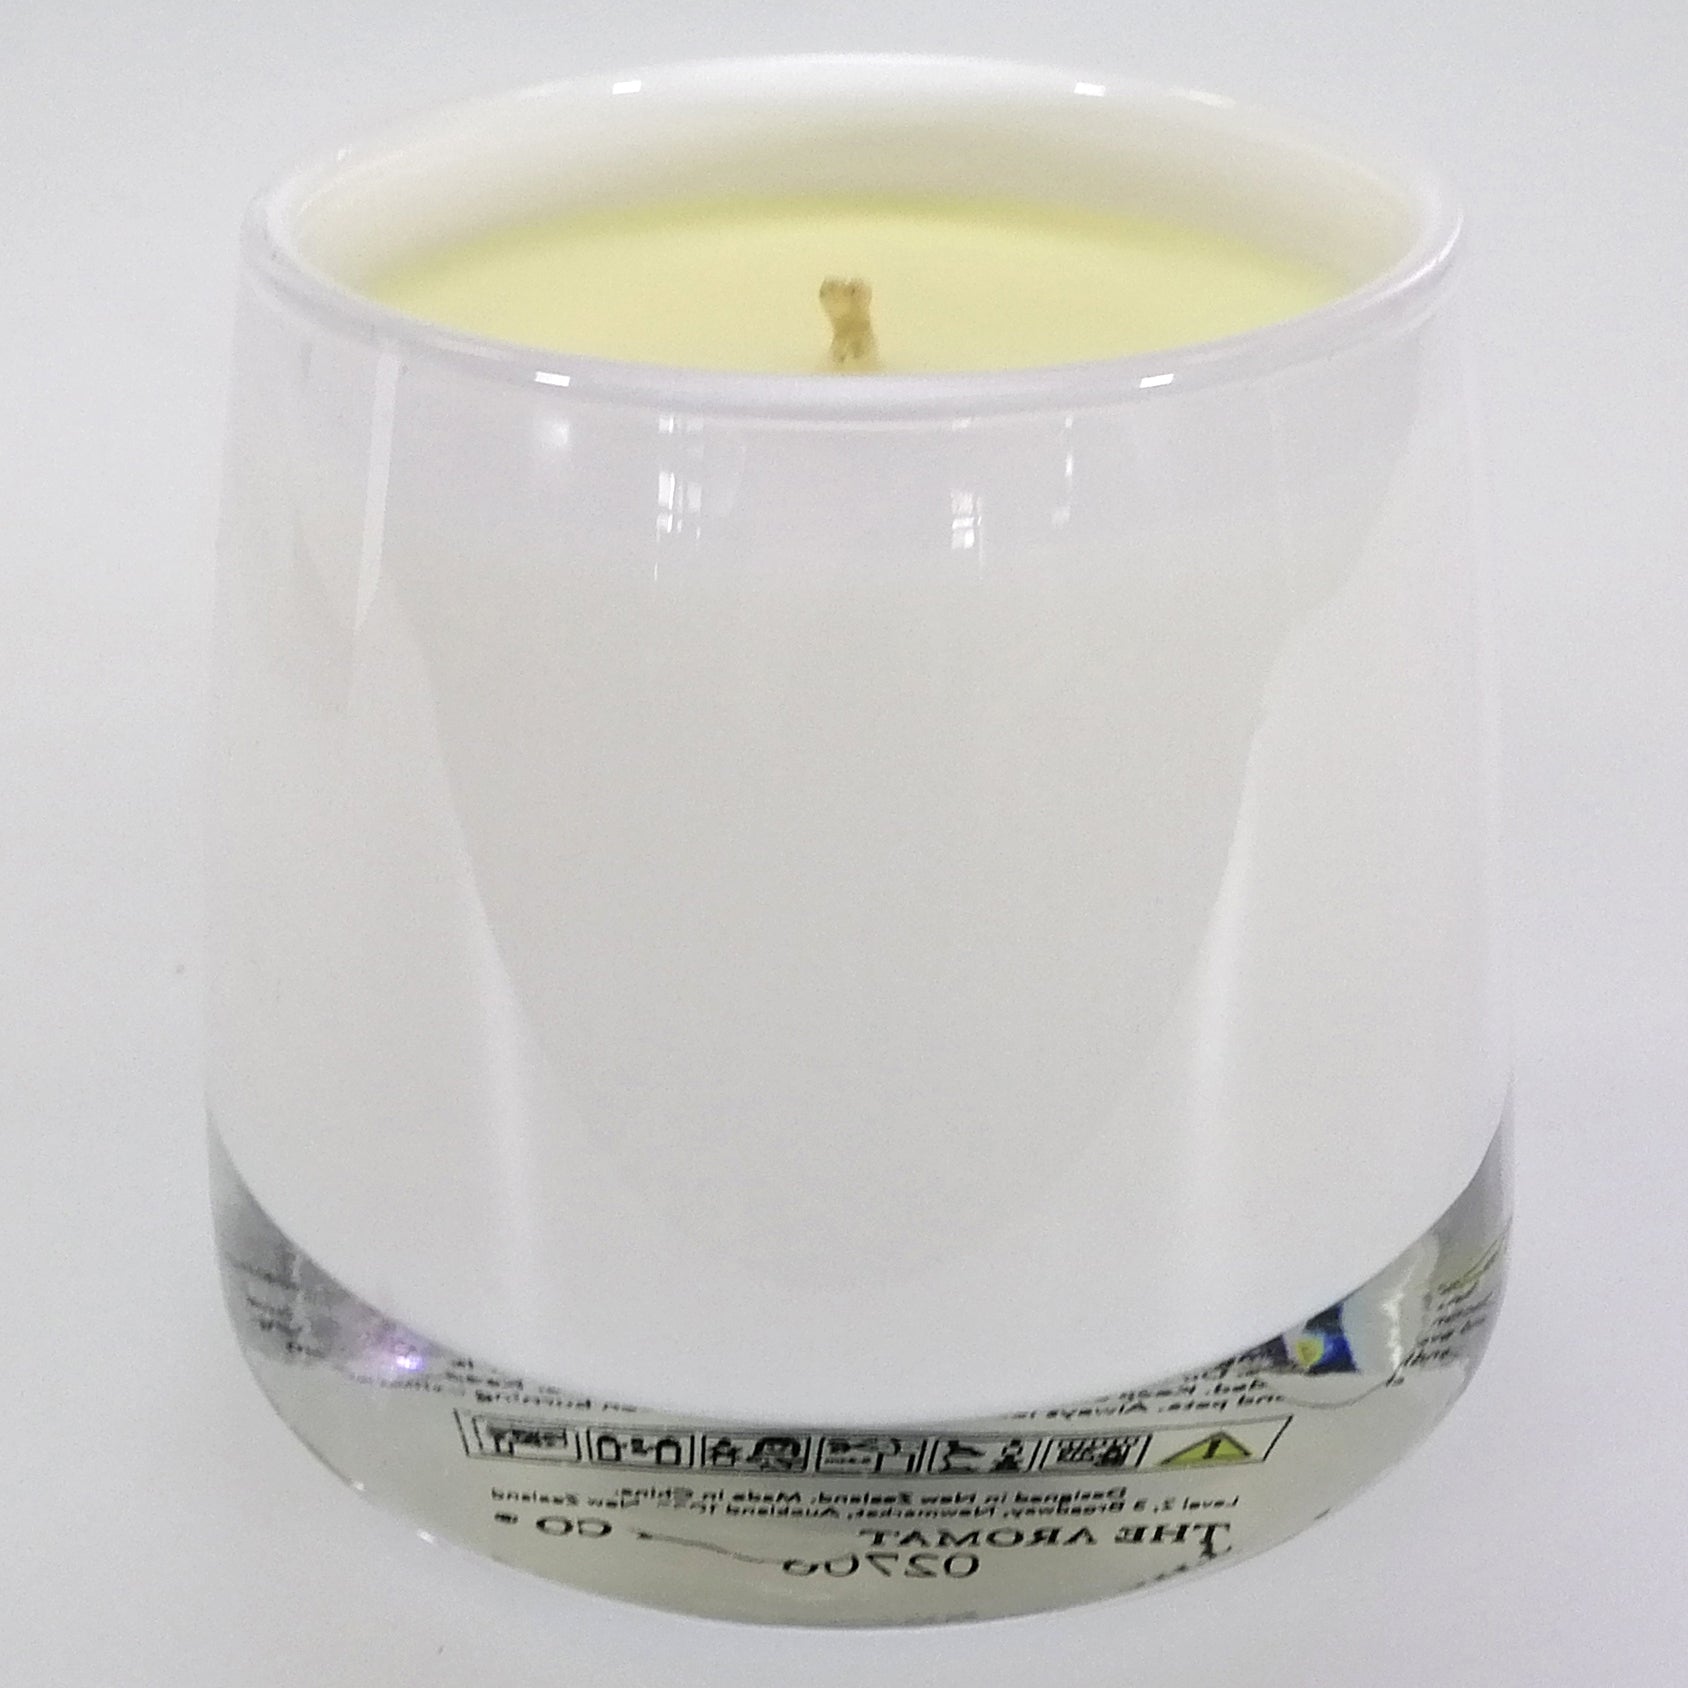 The Aromatherapy Company - Therapy Range 'Uplift' - Candle - Sweet Lime & Mandarin